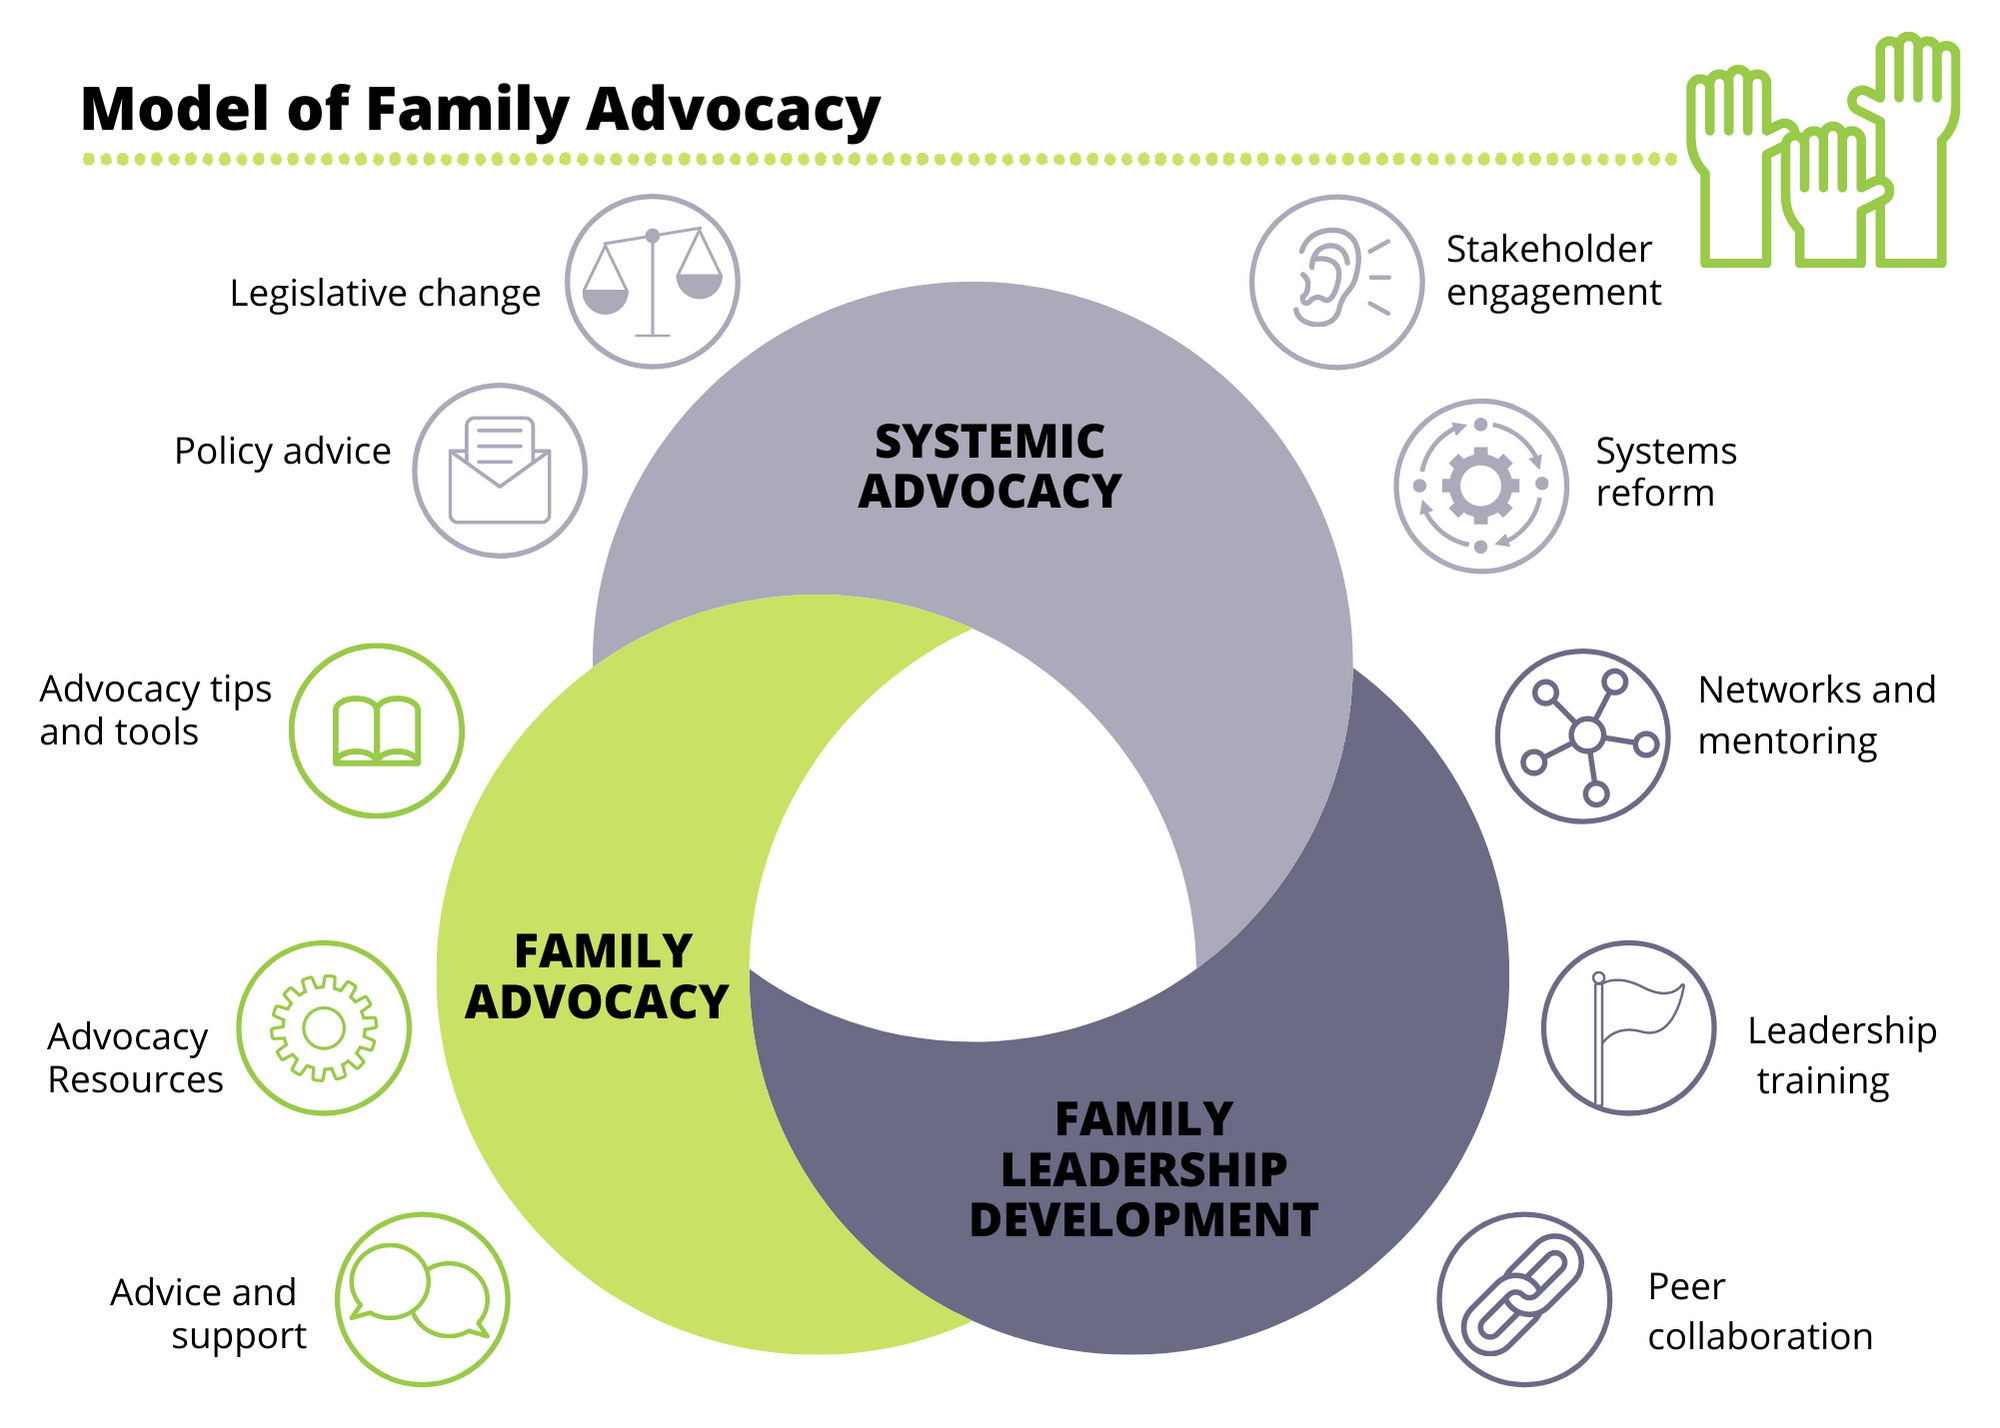 Model of Family Advocacy